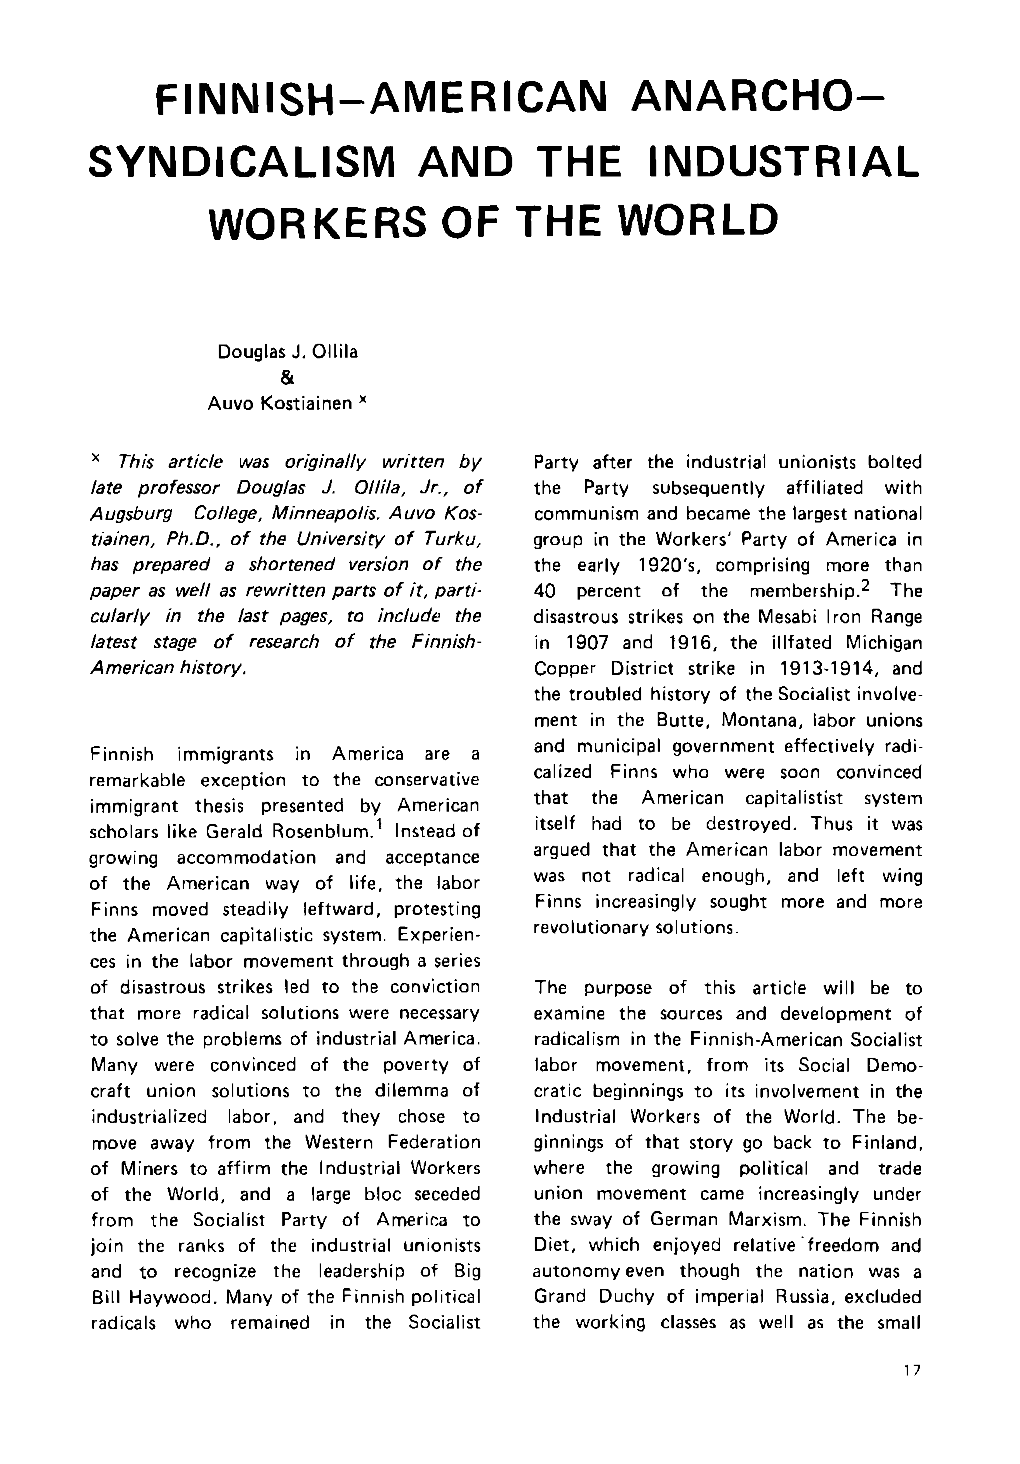 Syndicalism and the Industrial Workers of the World